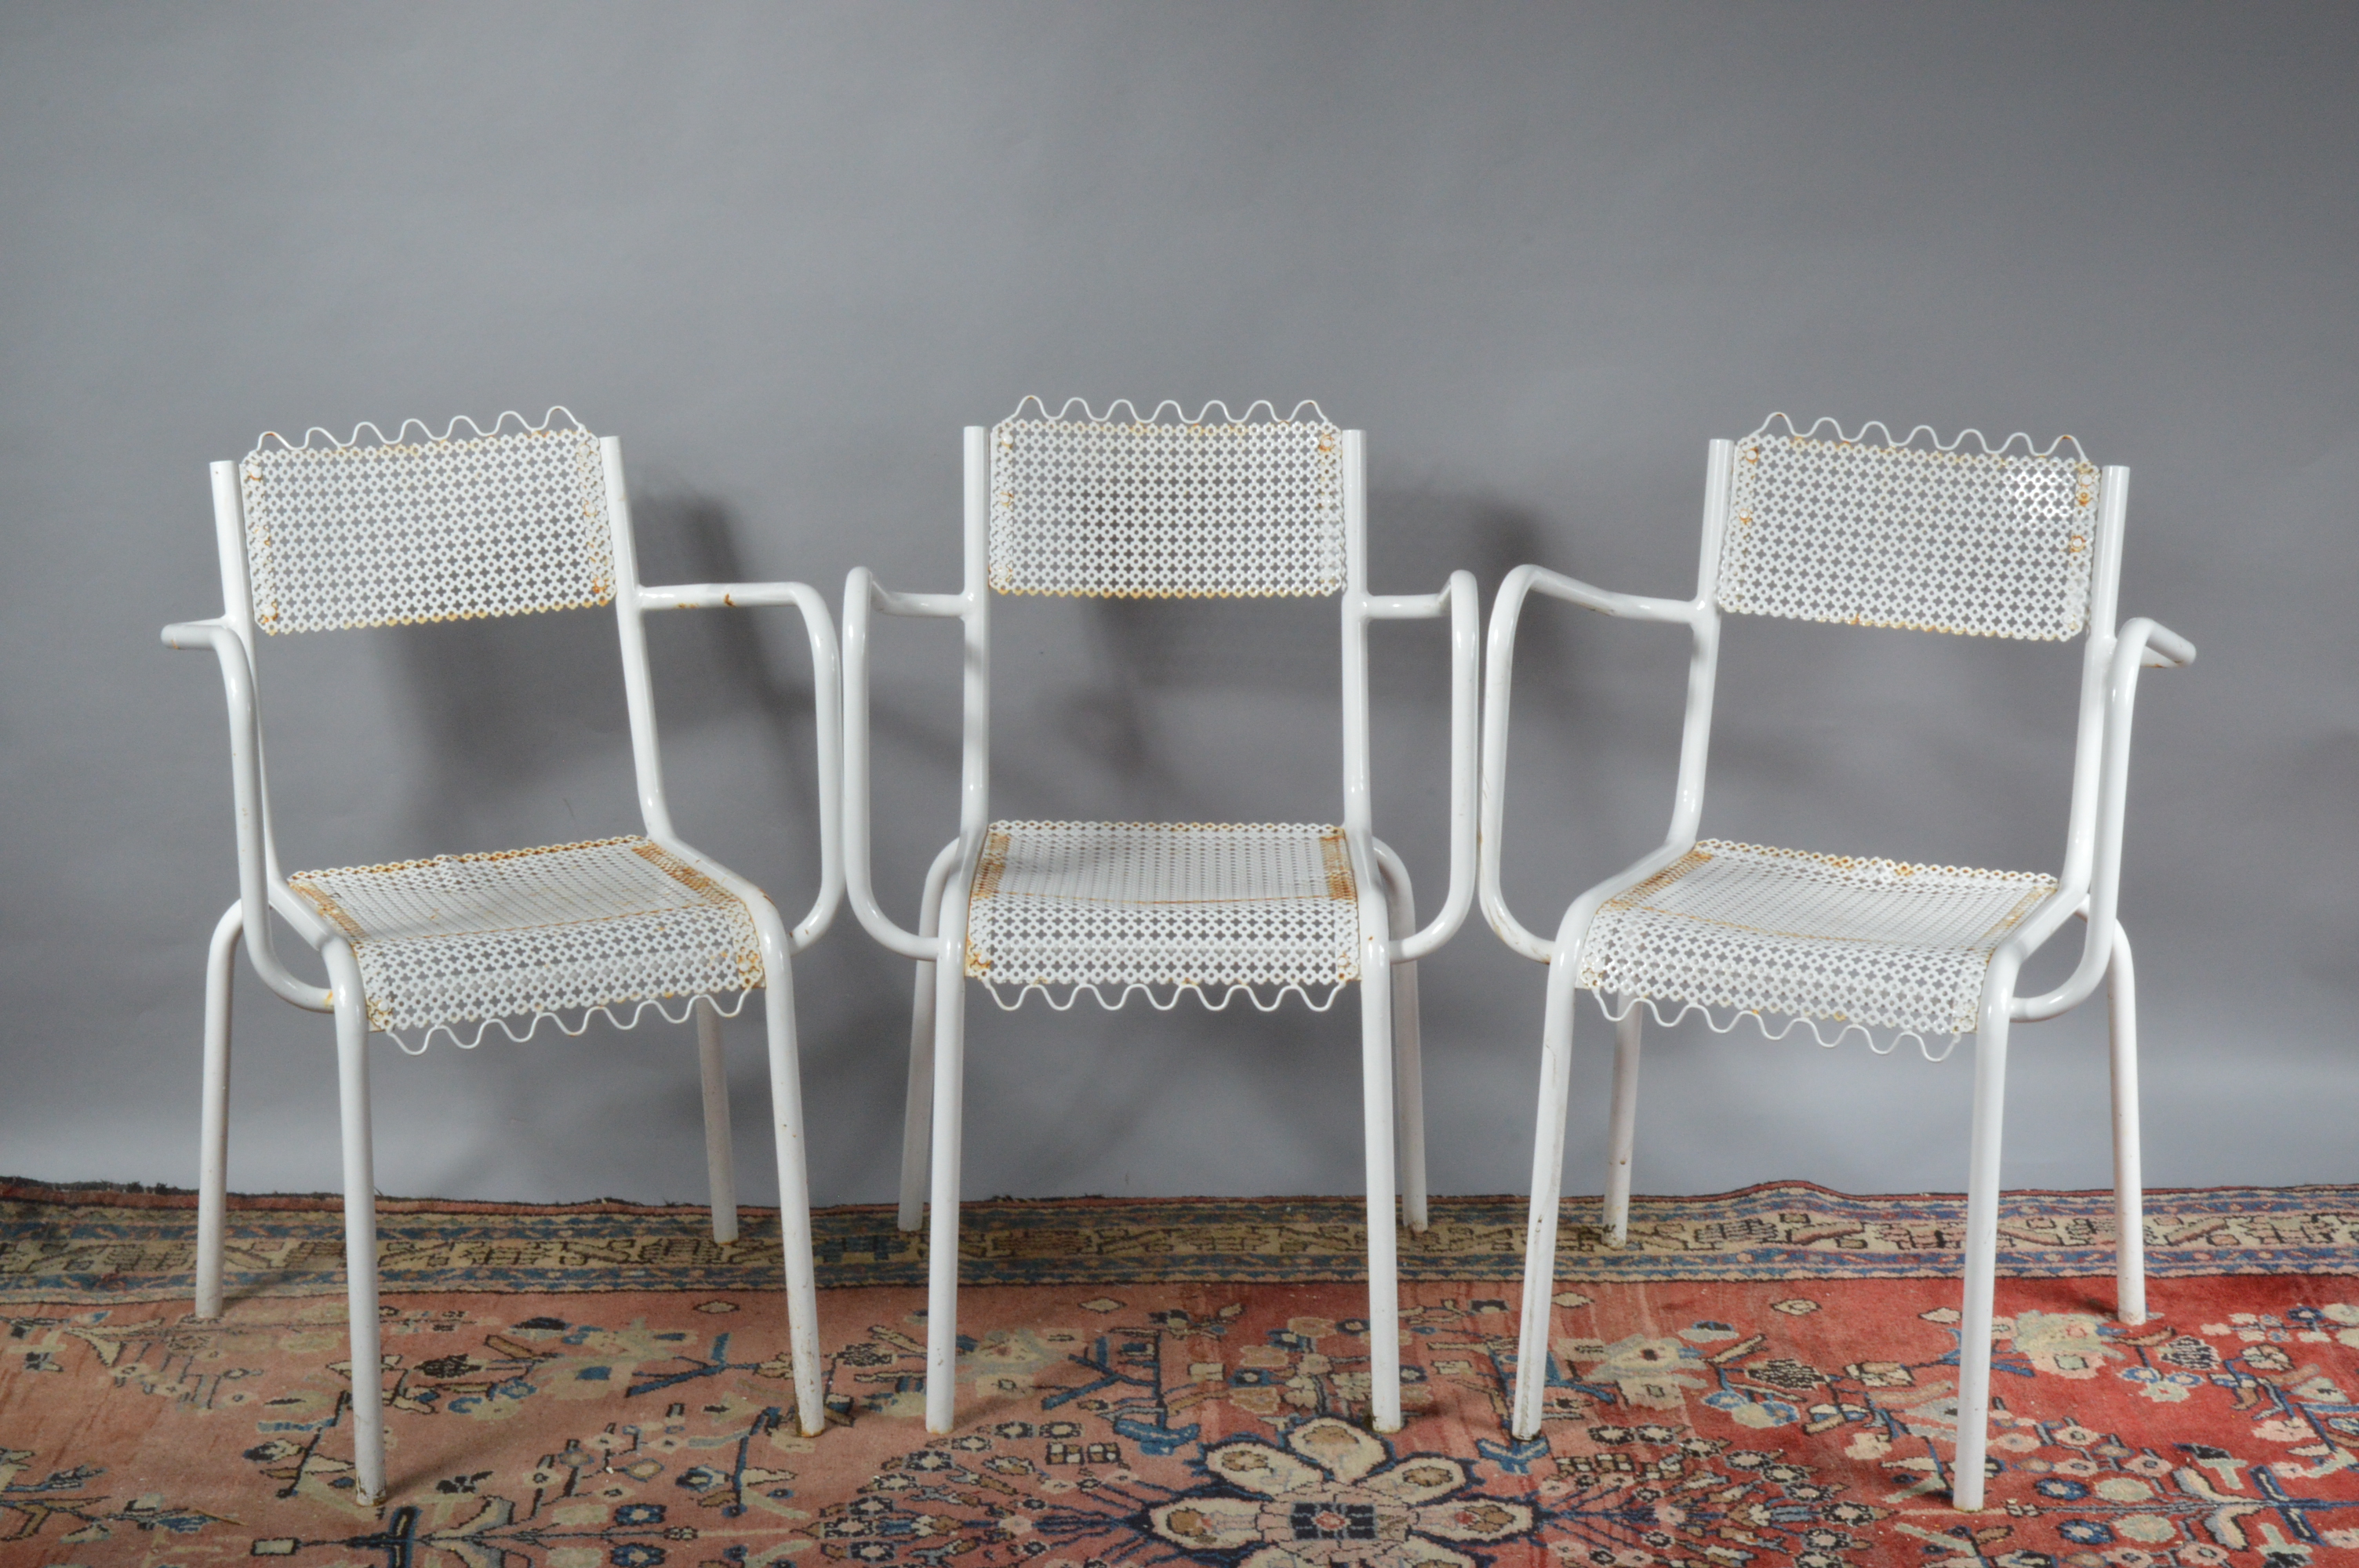 Three white-painted aluminium garden seats, pierced seats and backs, 76 cm tall, 48 cm wide. Some